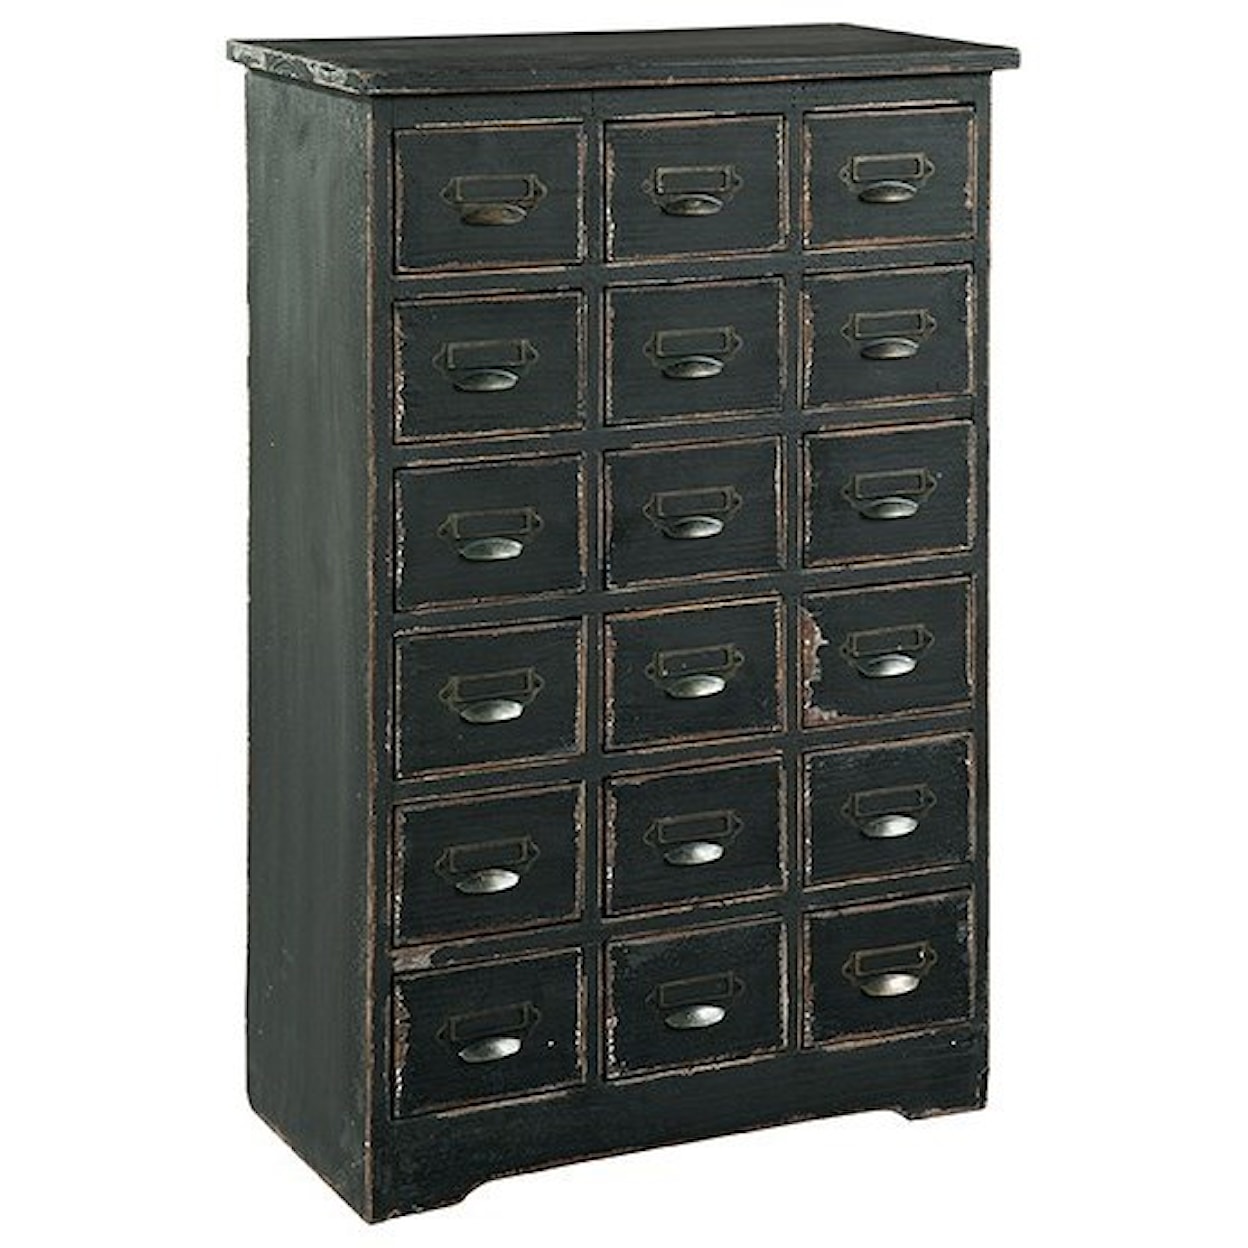 Hekman Marketplace Accents Library Chest